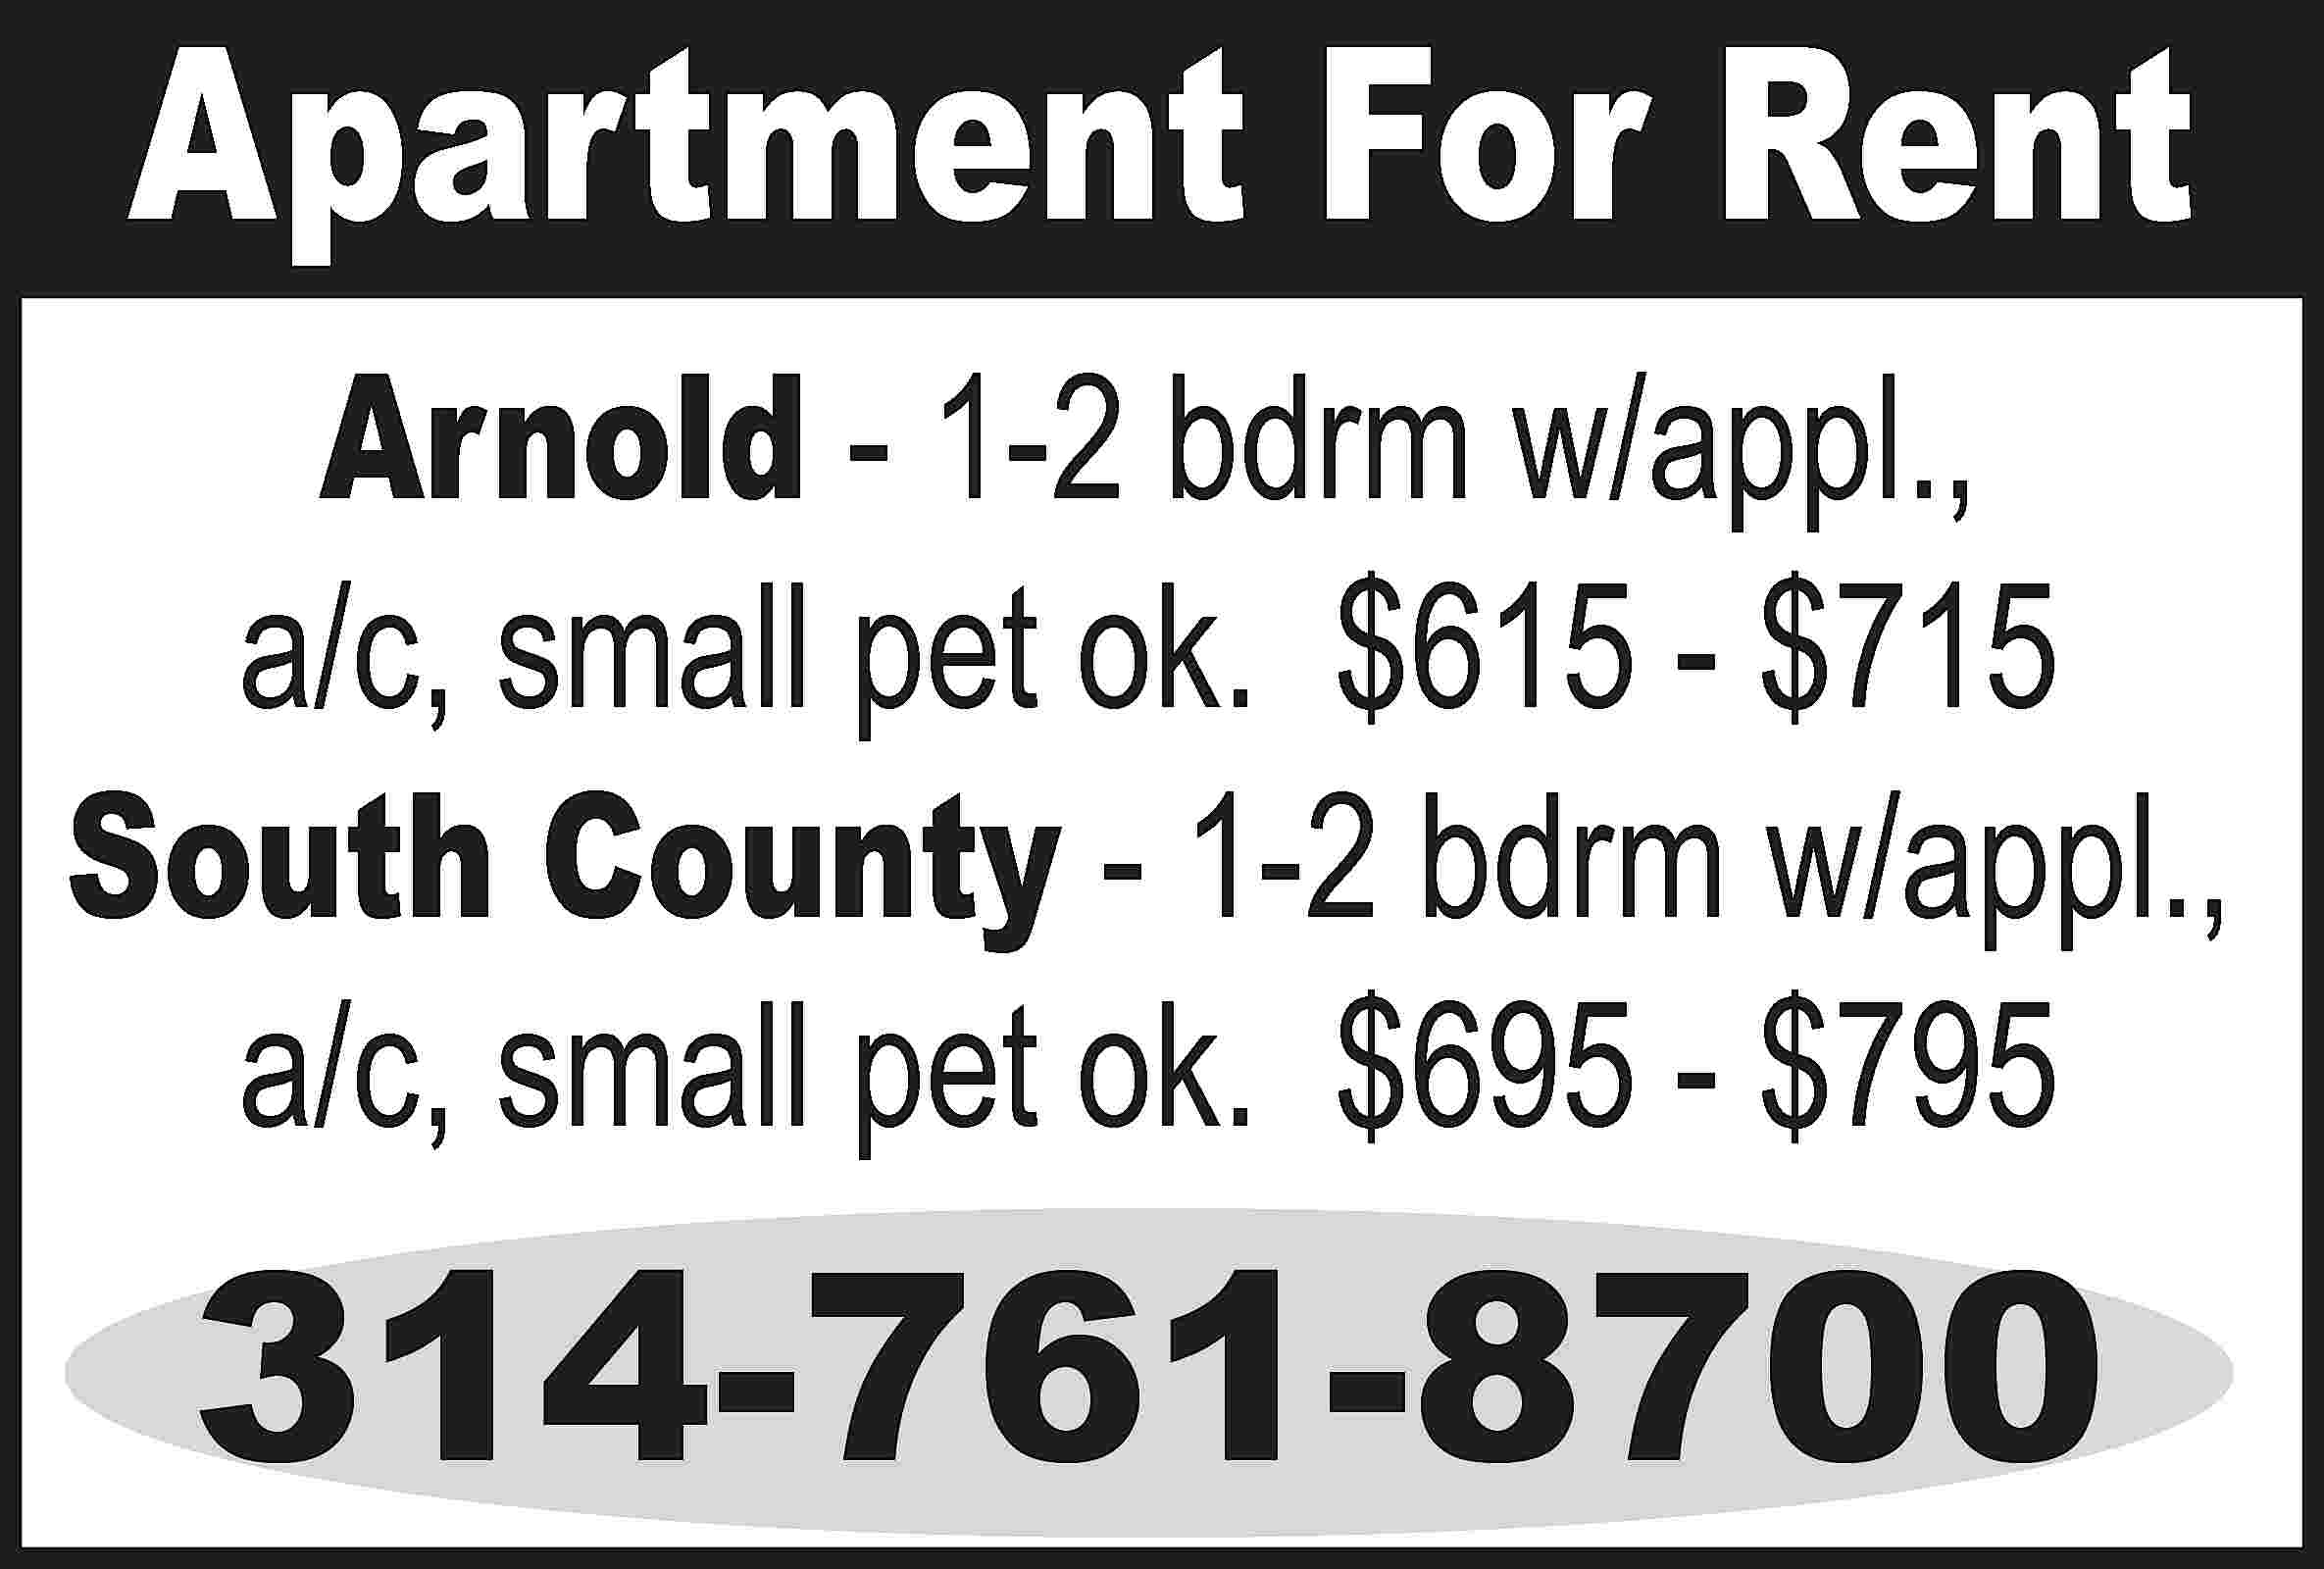 Apartment For Rent Arnold -  Apartment For Rent Arnold - 1-2 bdrm w/appl., a/c, small pet ok. $615 - $715 South County - 1-2 bdrm w/appl., a/c, small pet ok. $695 - $795 314-761-8700